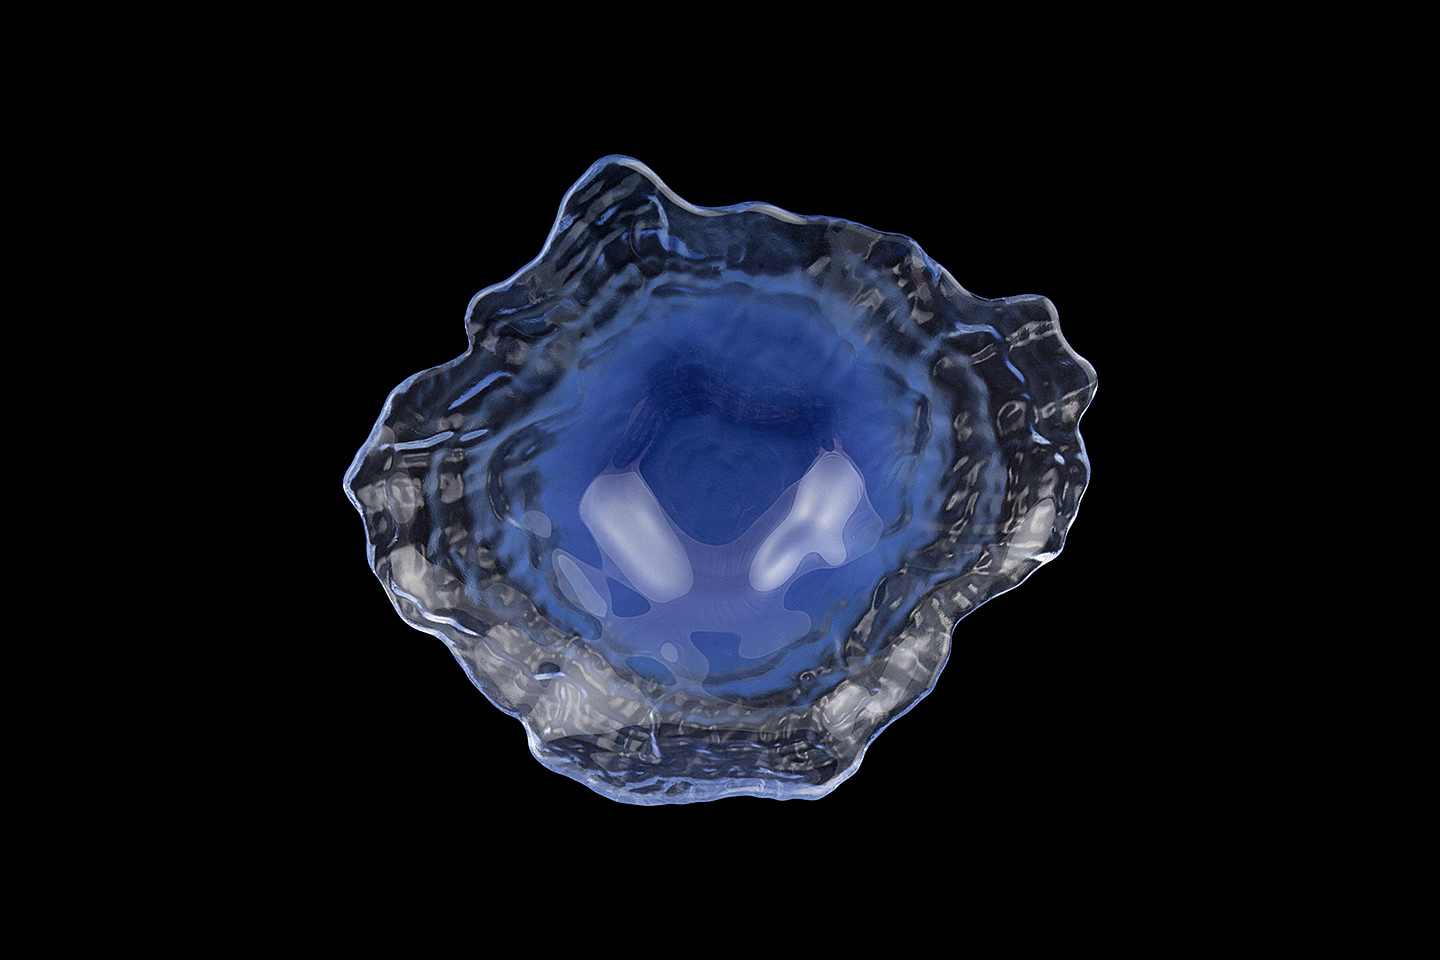 a huge image enlargement of the mandarin orange trading company oyster plate in blue